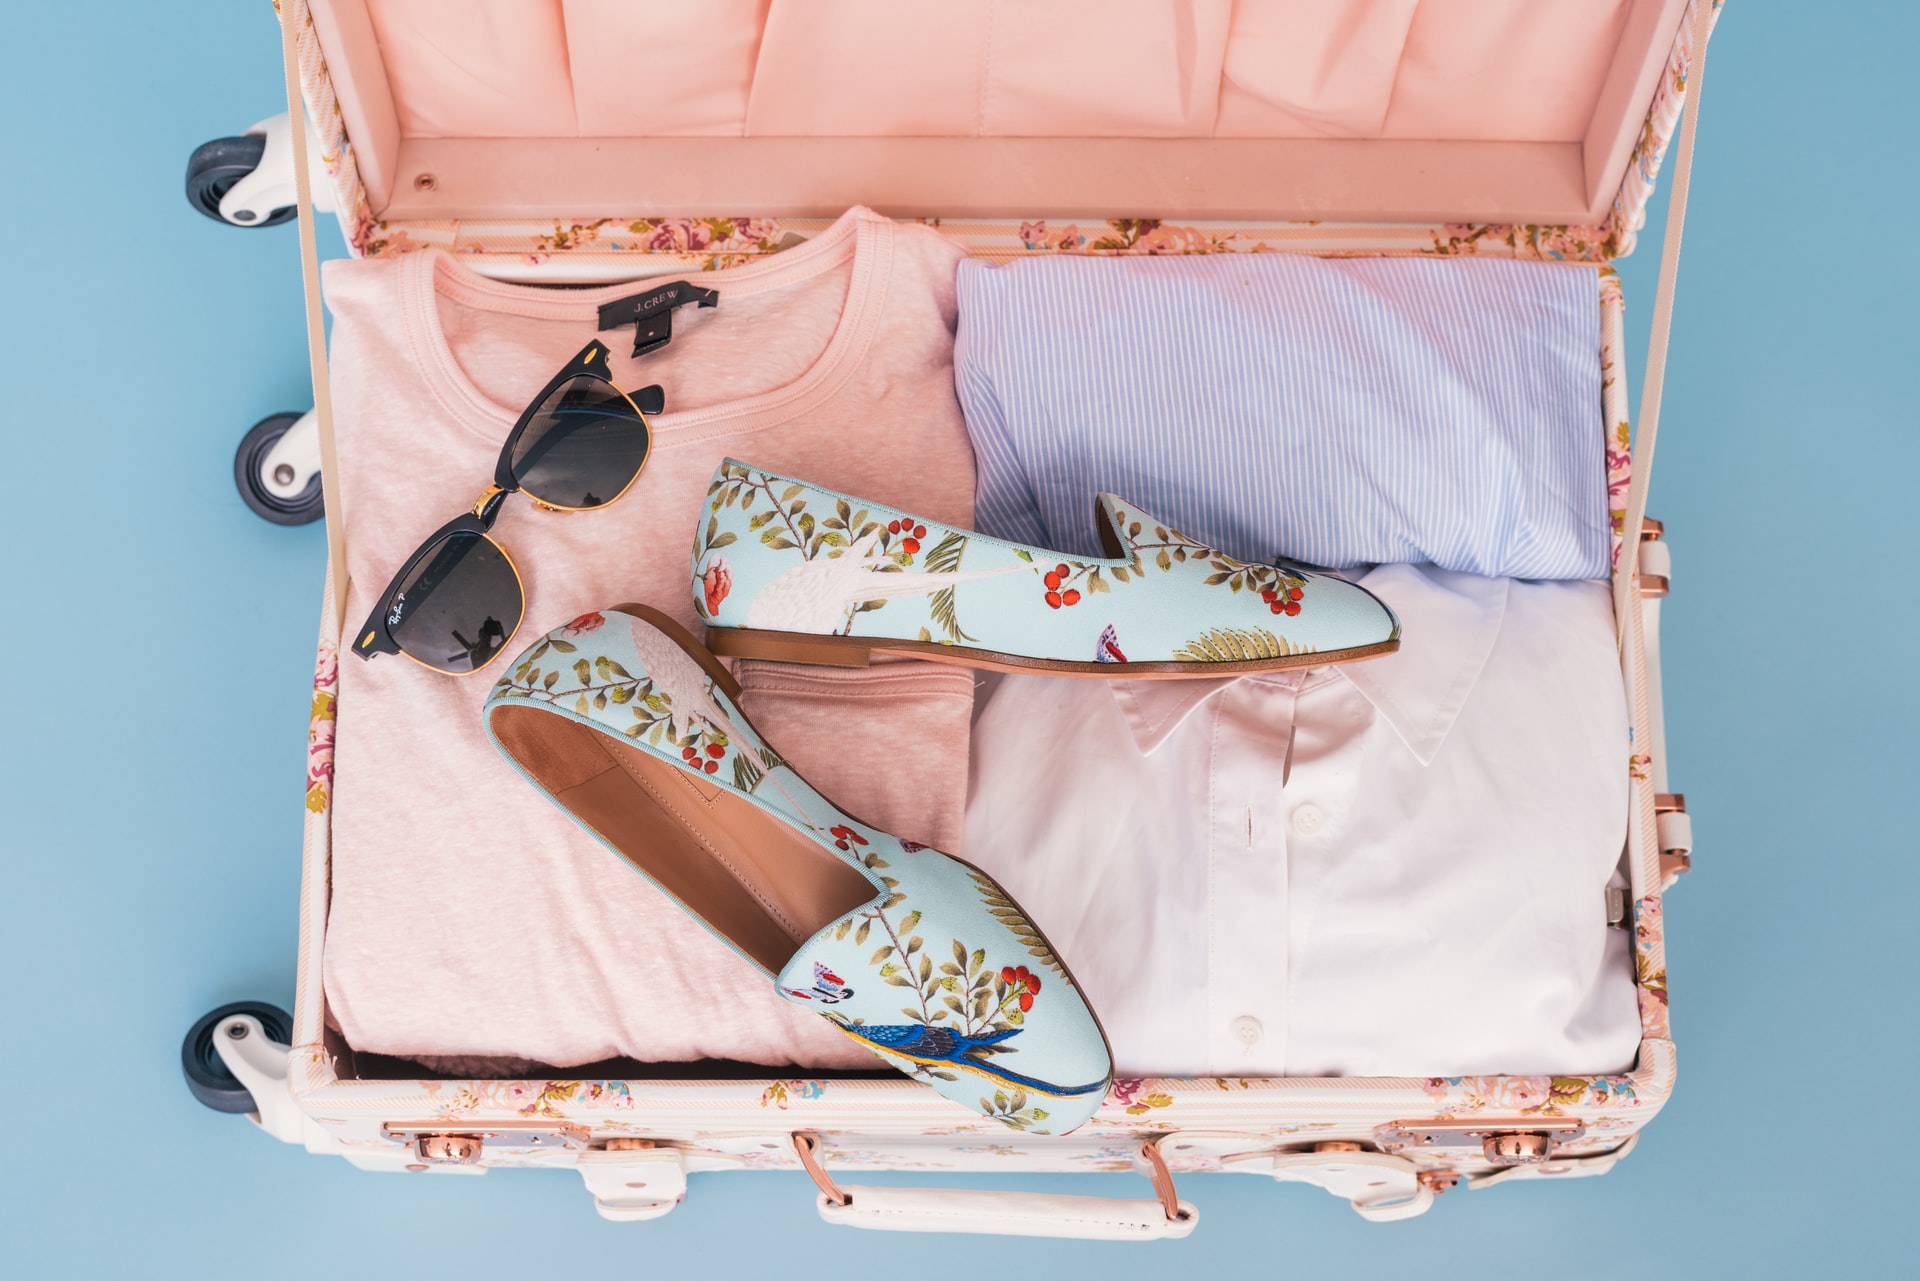 What to pack for an extended vacation?